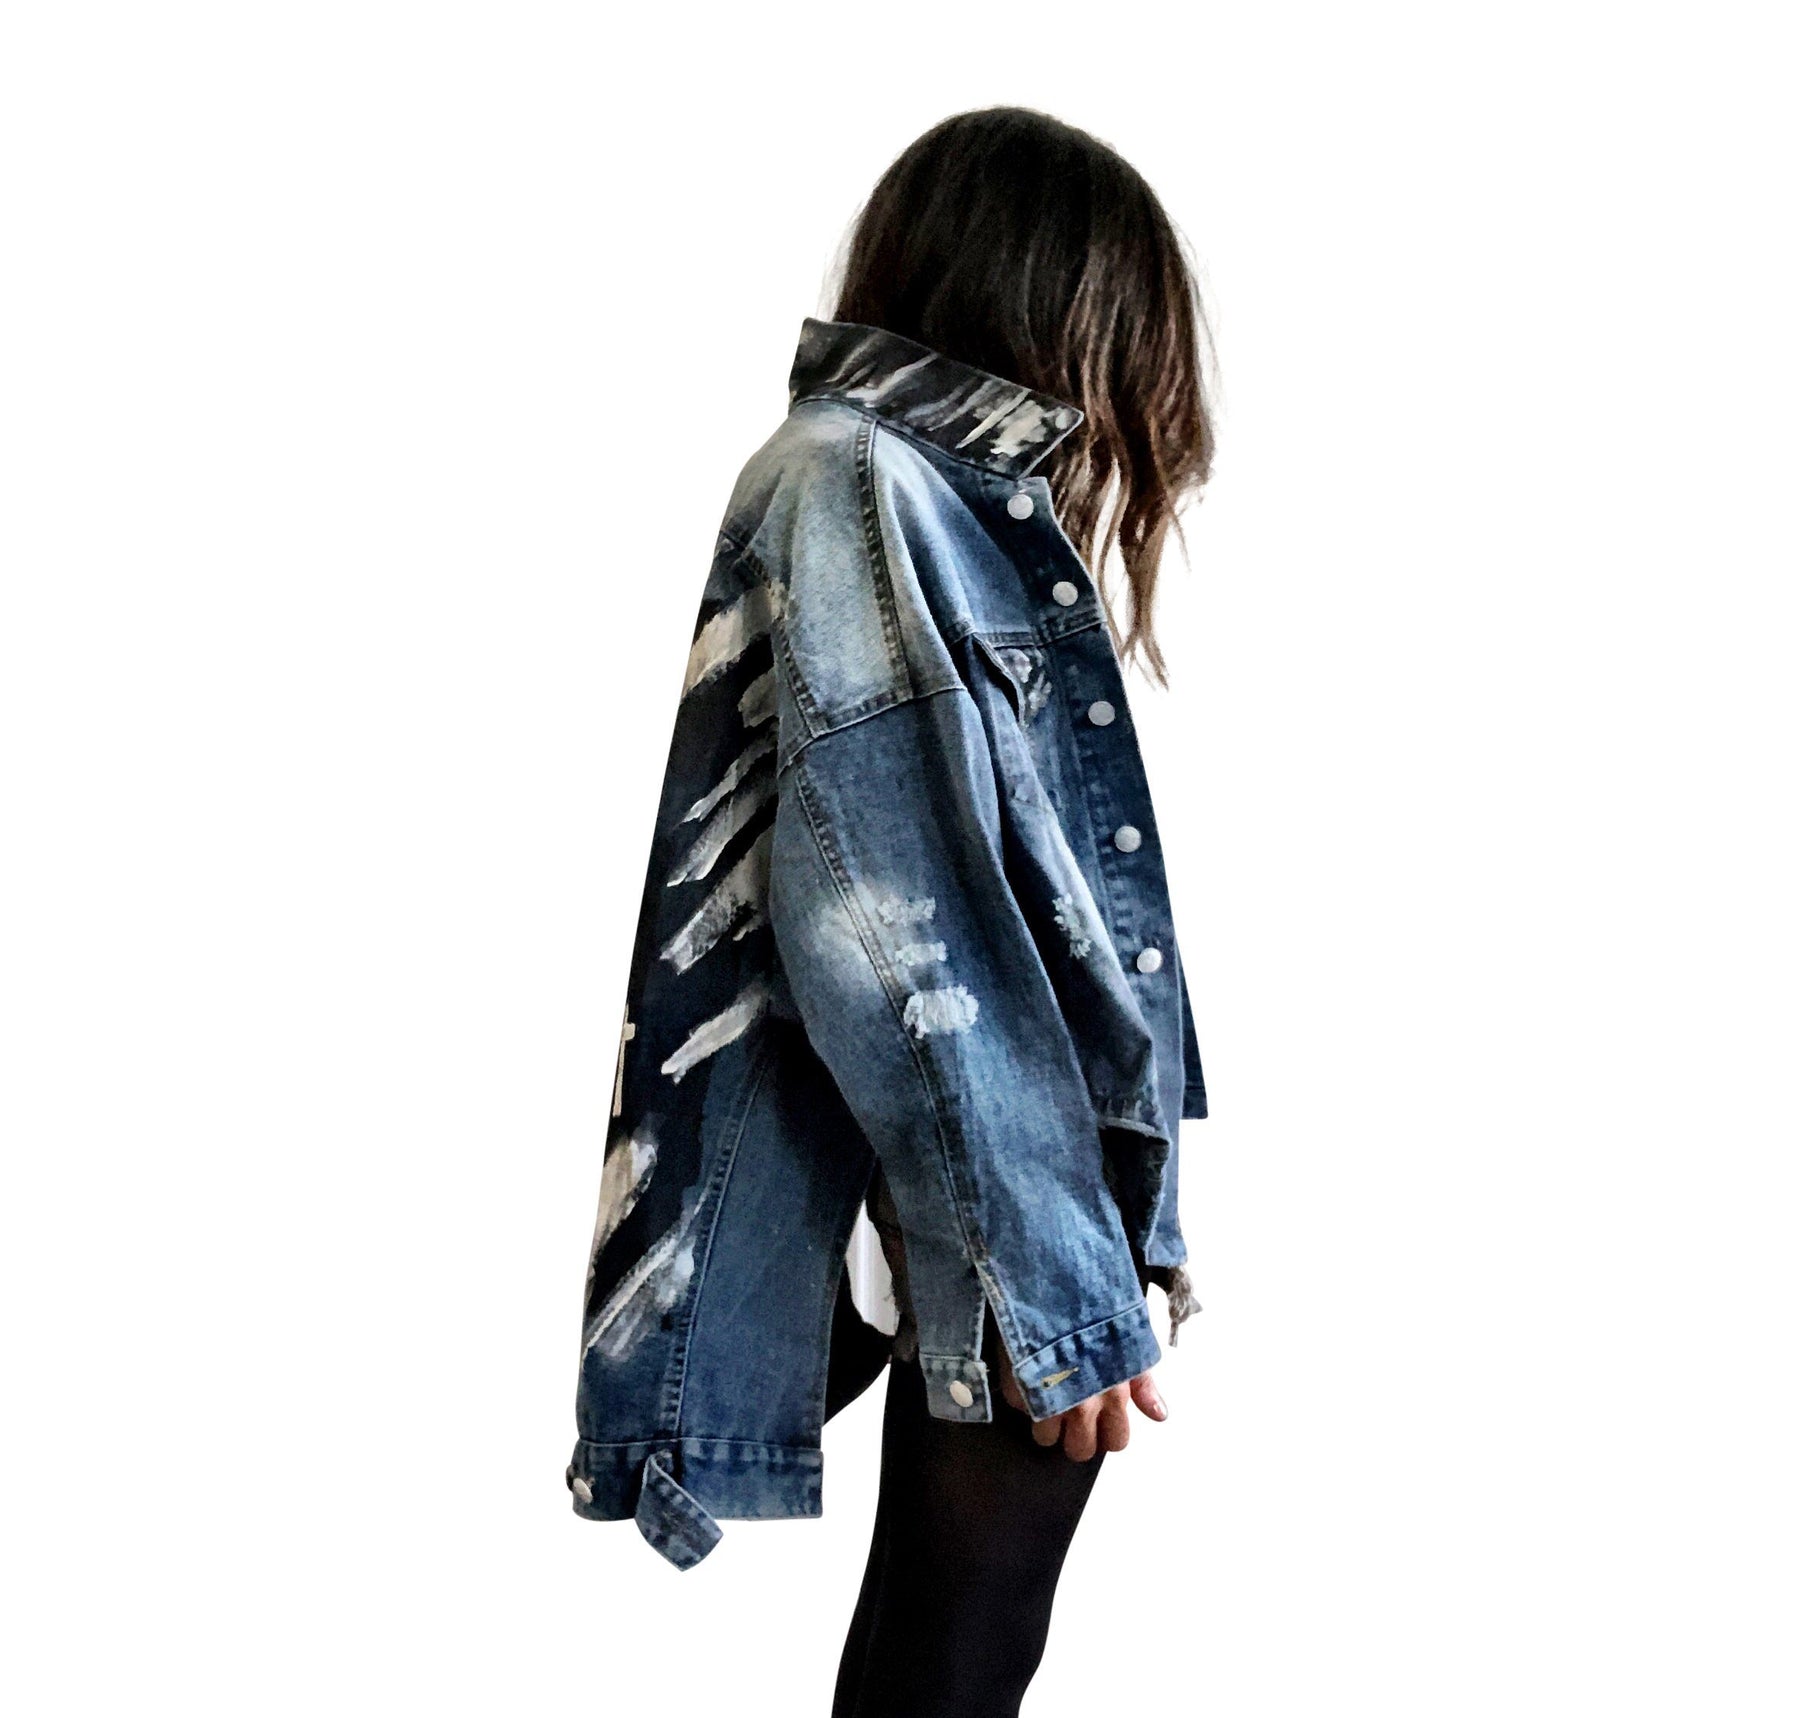 Dark blue denim jacket with long back. White and black pattern painted on back, with ART SCHOOL DROPOUT painted over it in white. Collar and front pockets painted with black and white pattern. Signed @wrenandglory.